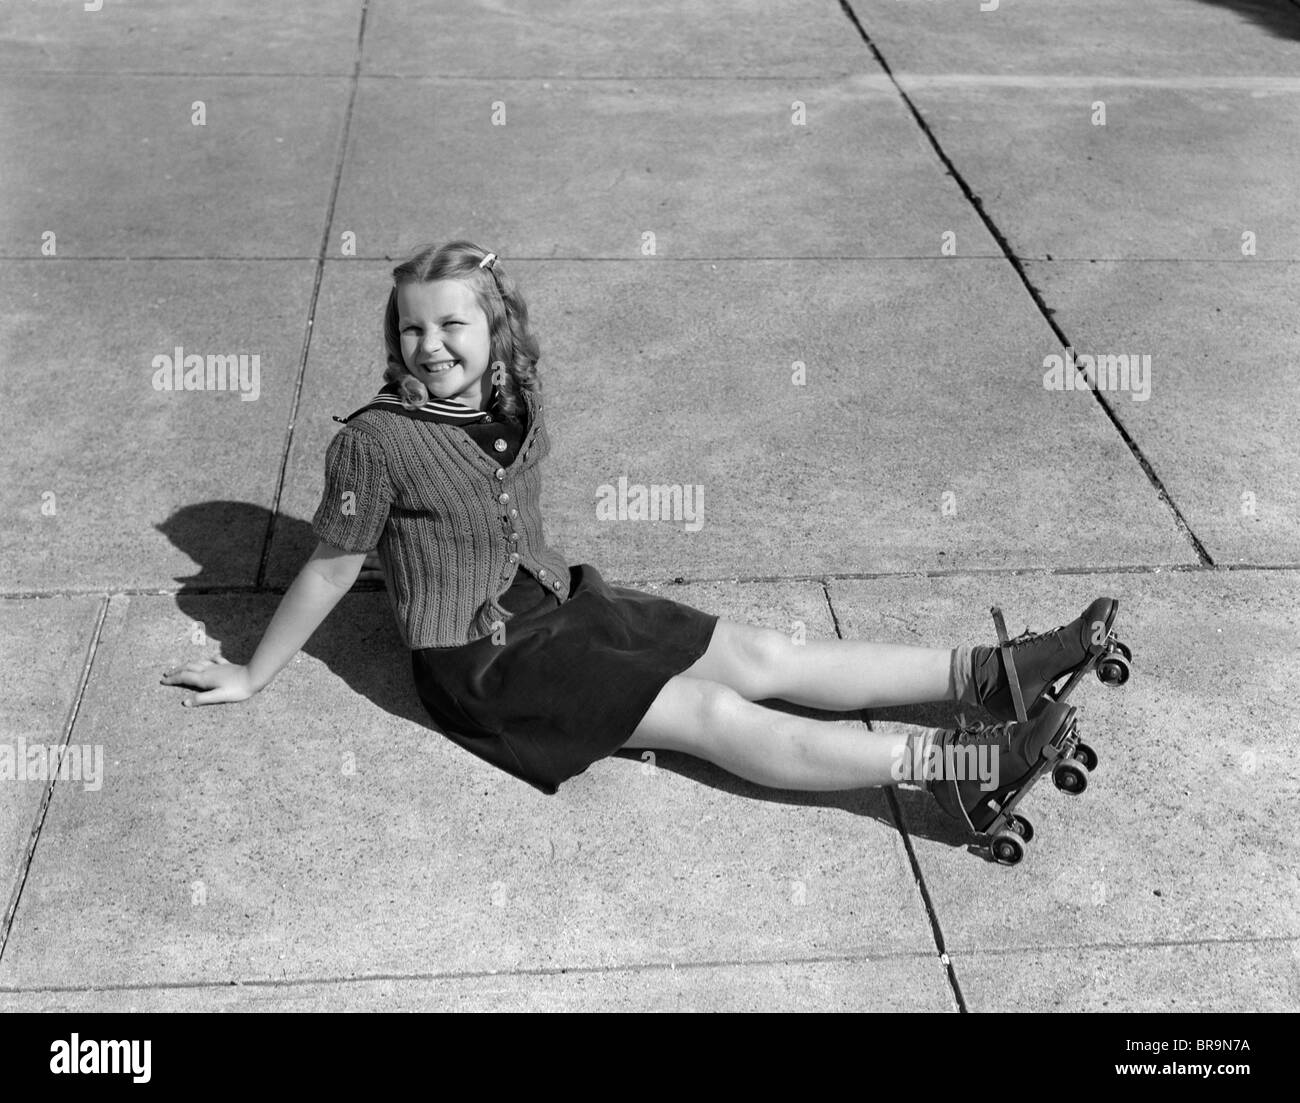 1940s LITTLE GIRL SITTING ON GROUND WEARING ROLLER-SKATES LOOKING AT CAMERA Stock Photo